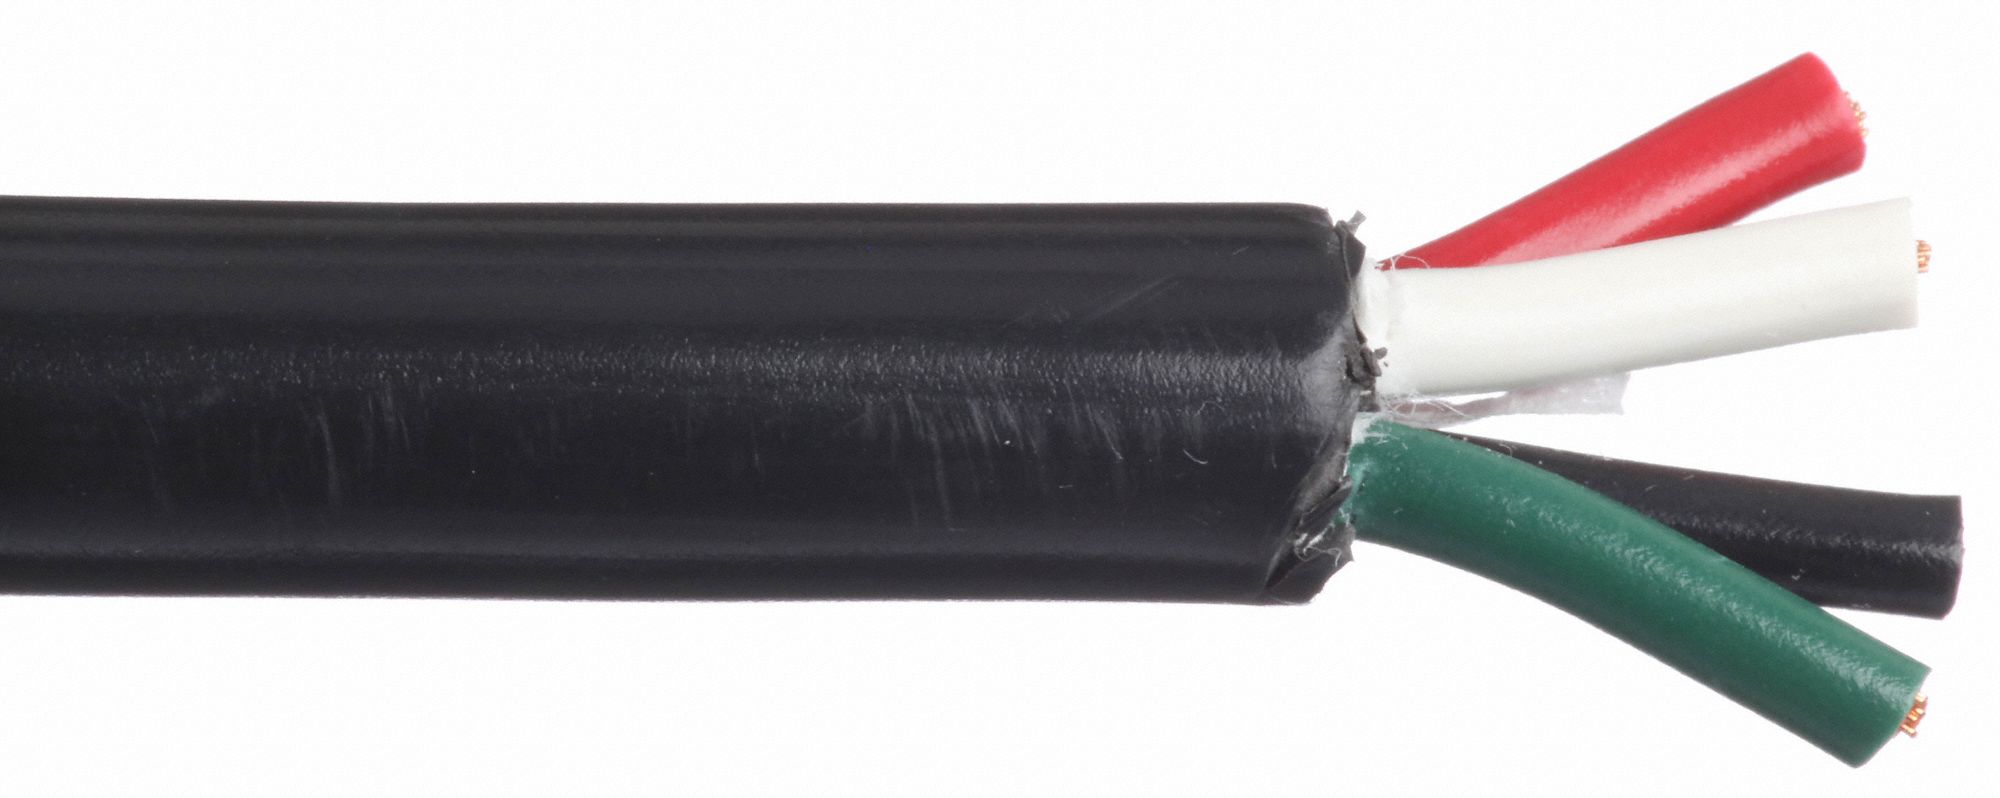 Velvac Trailer Cable Number Of Conductors 4 14 Awg Pvc 100 Ft